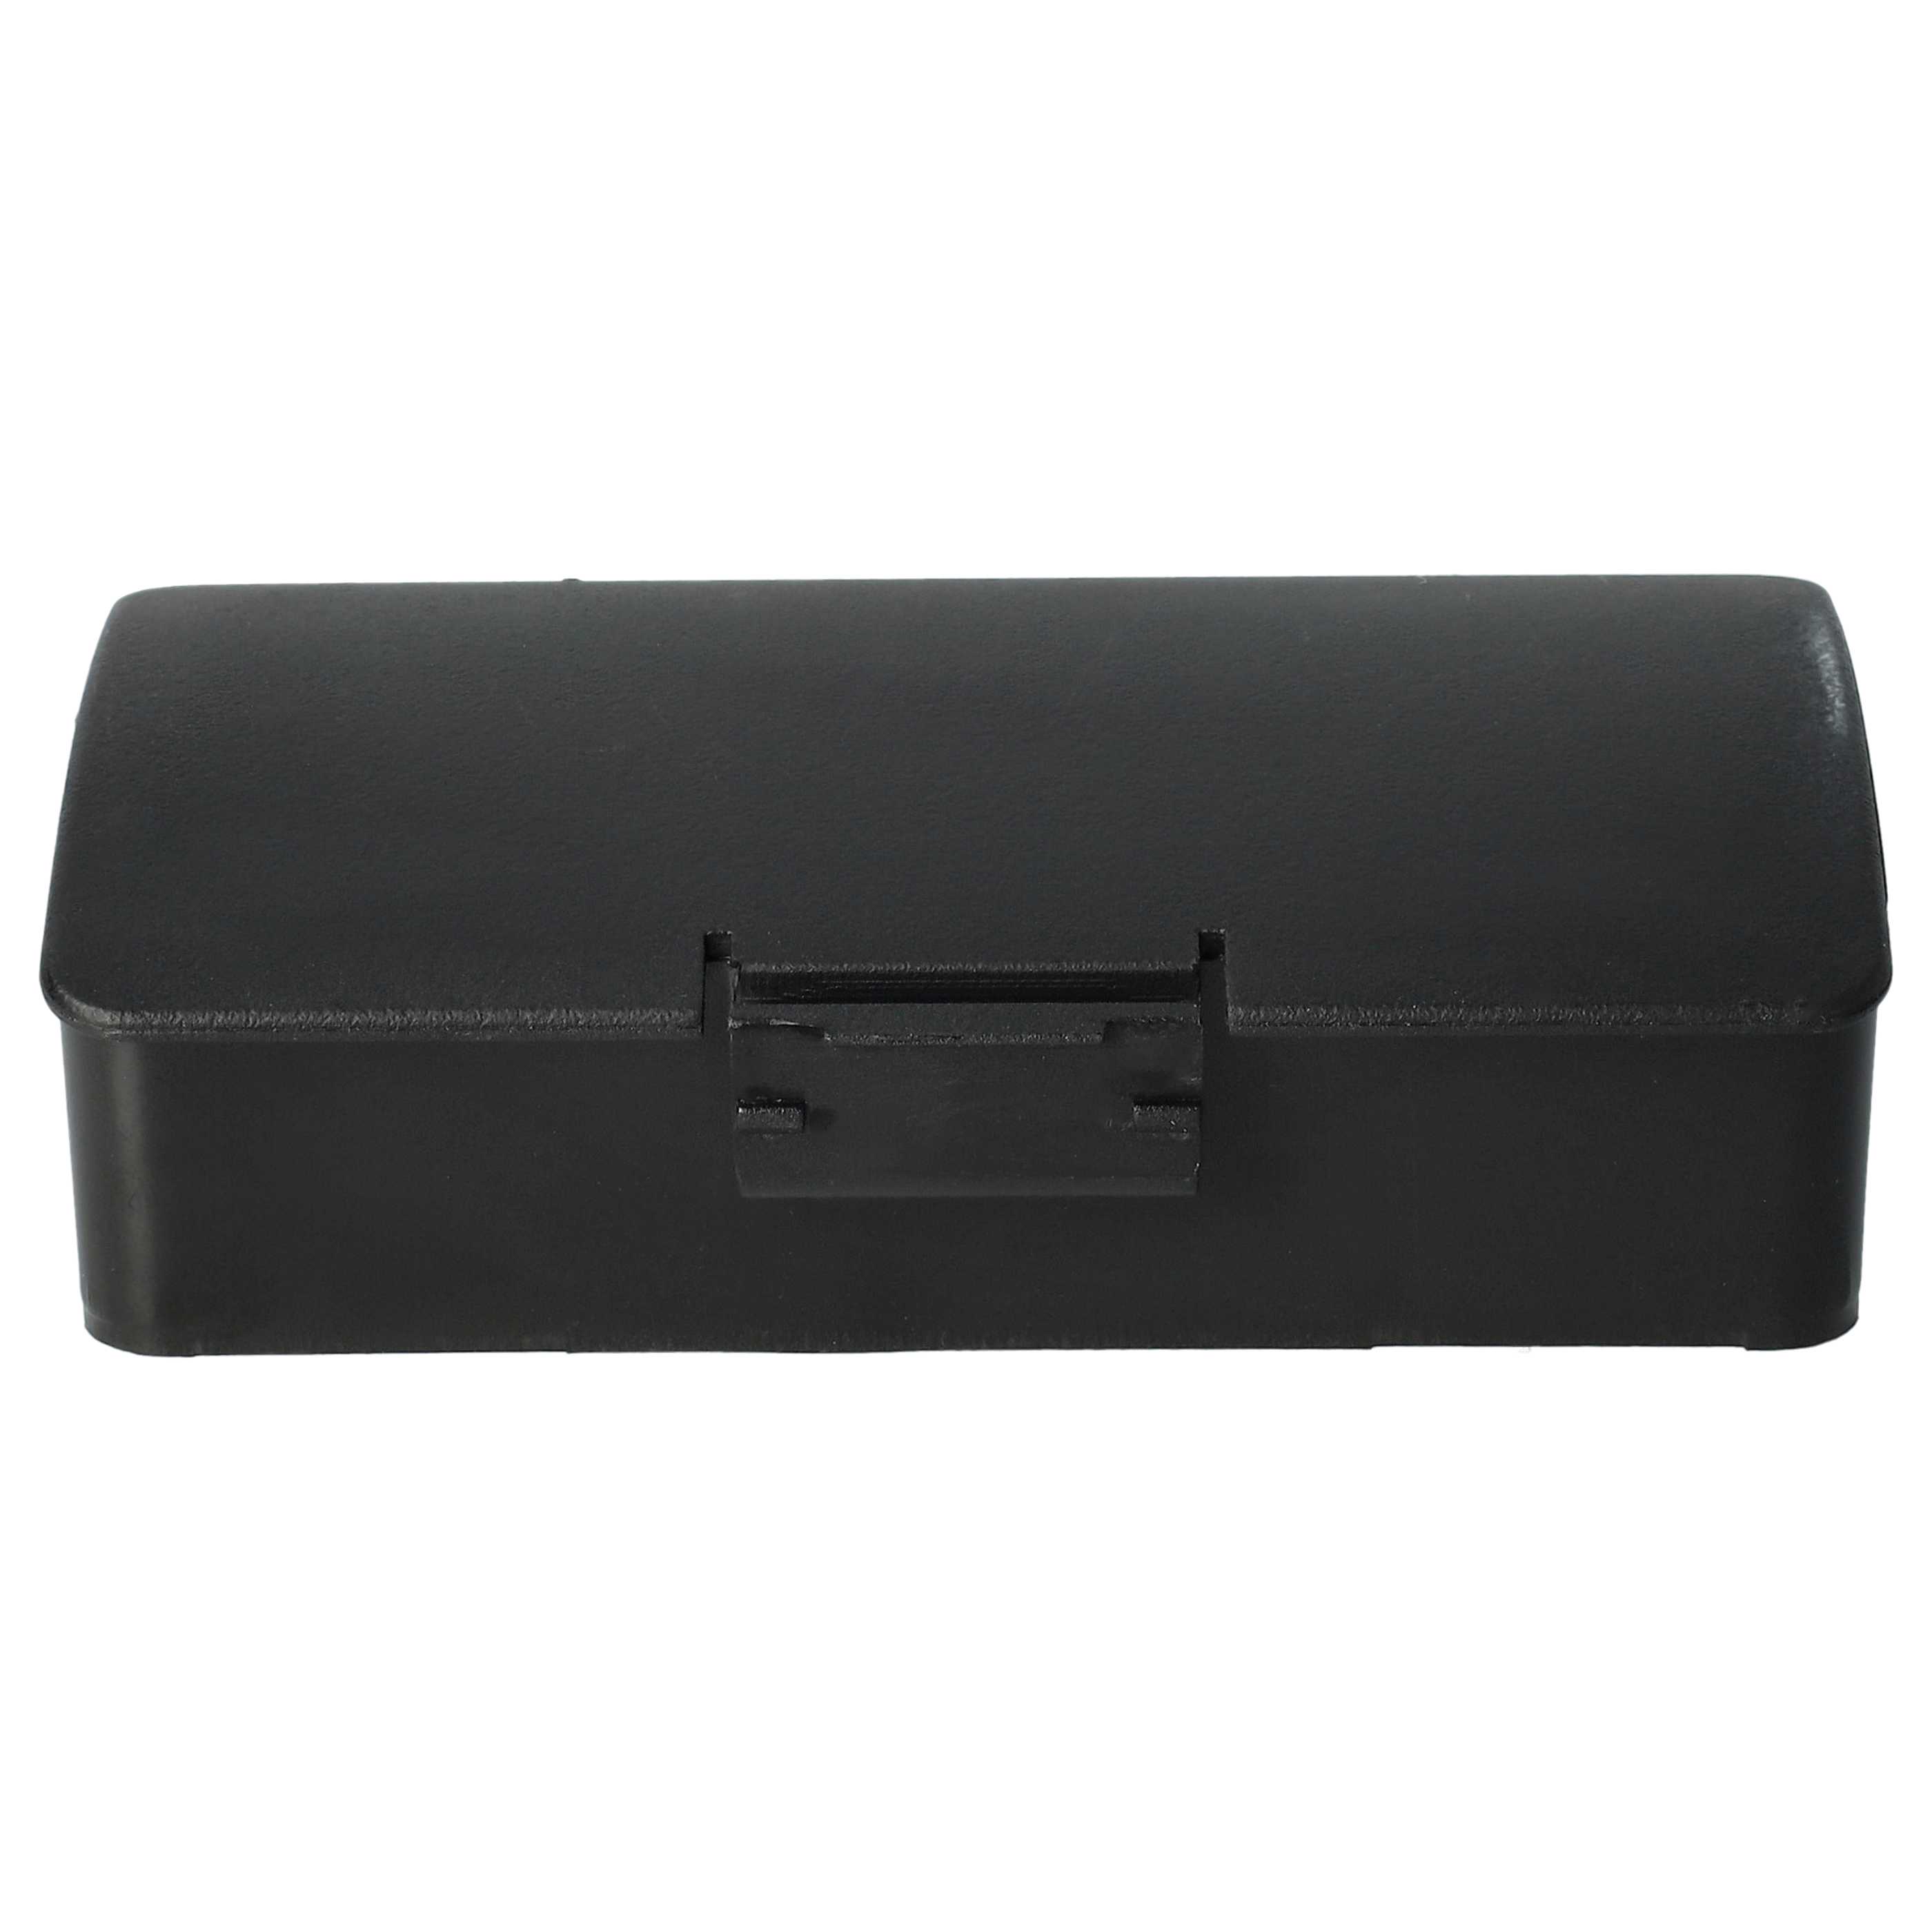 GPS Battery Replacement for Garmin 010-10517-00, 010-10517-01, 011-00955-00, 01070800001 - 2600mAh, 8.4V